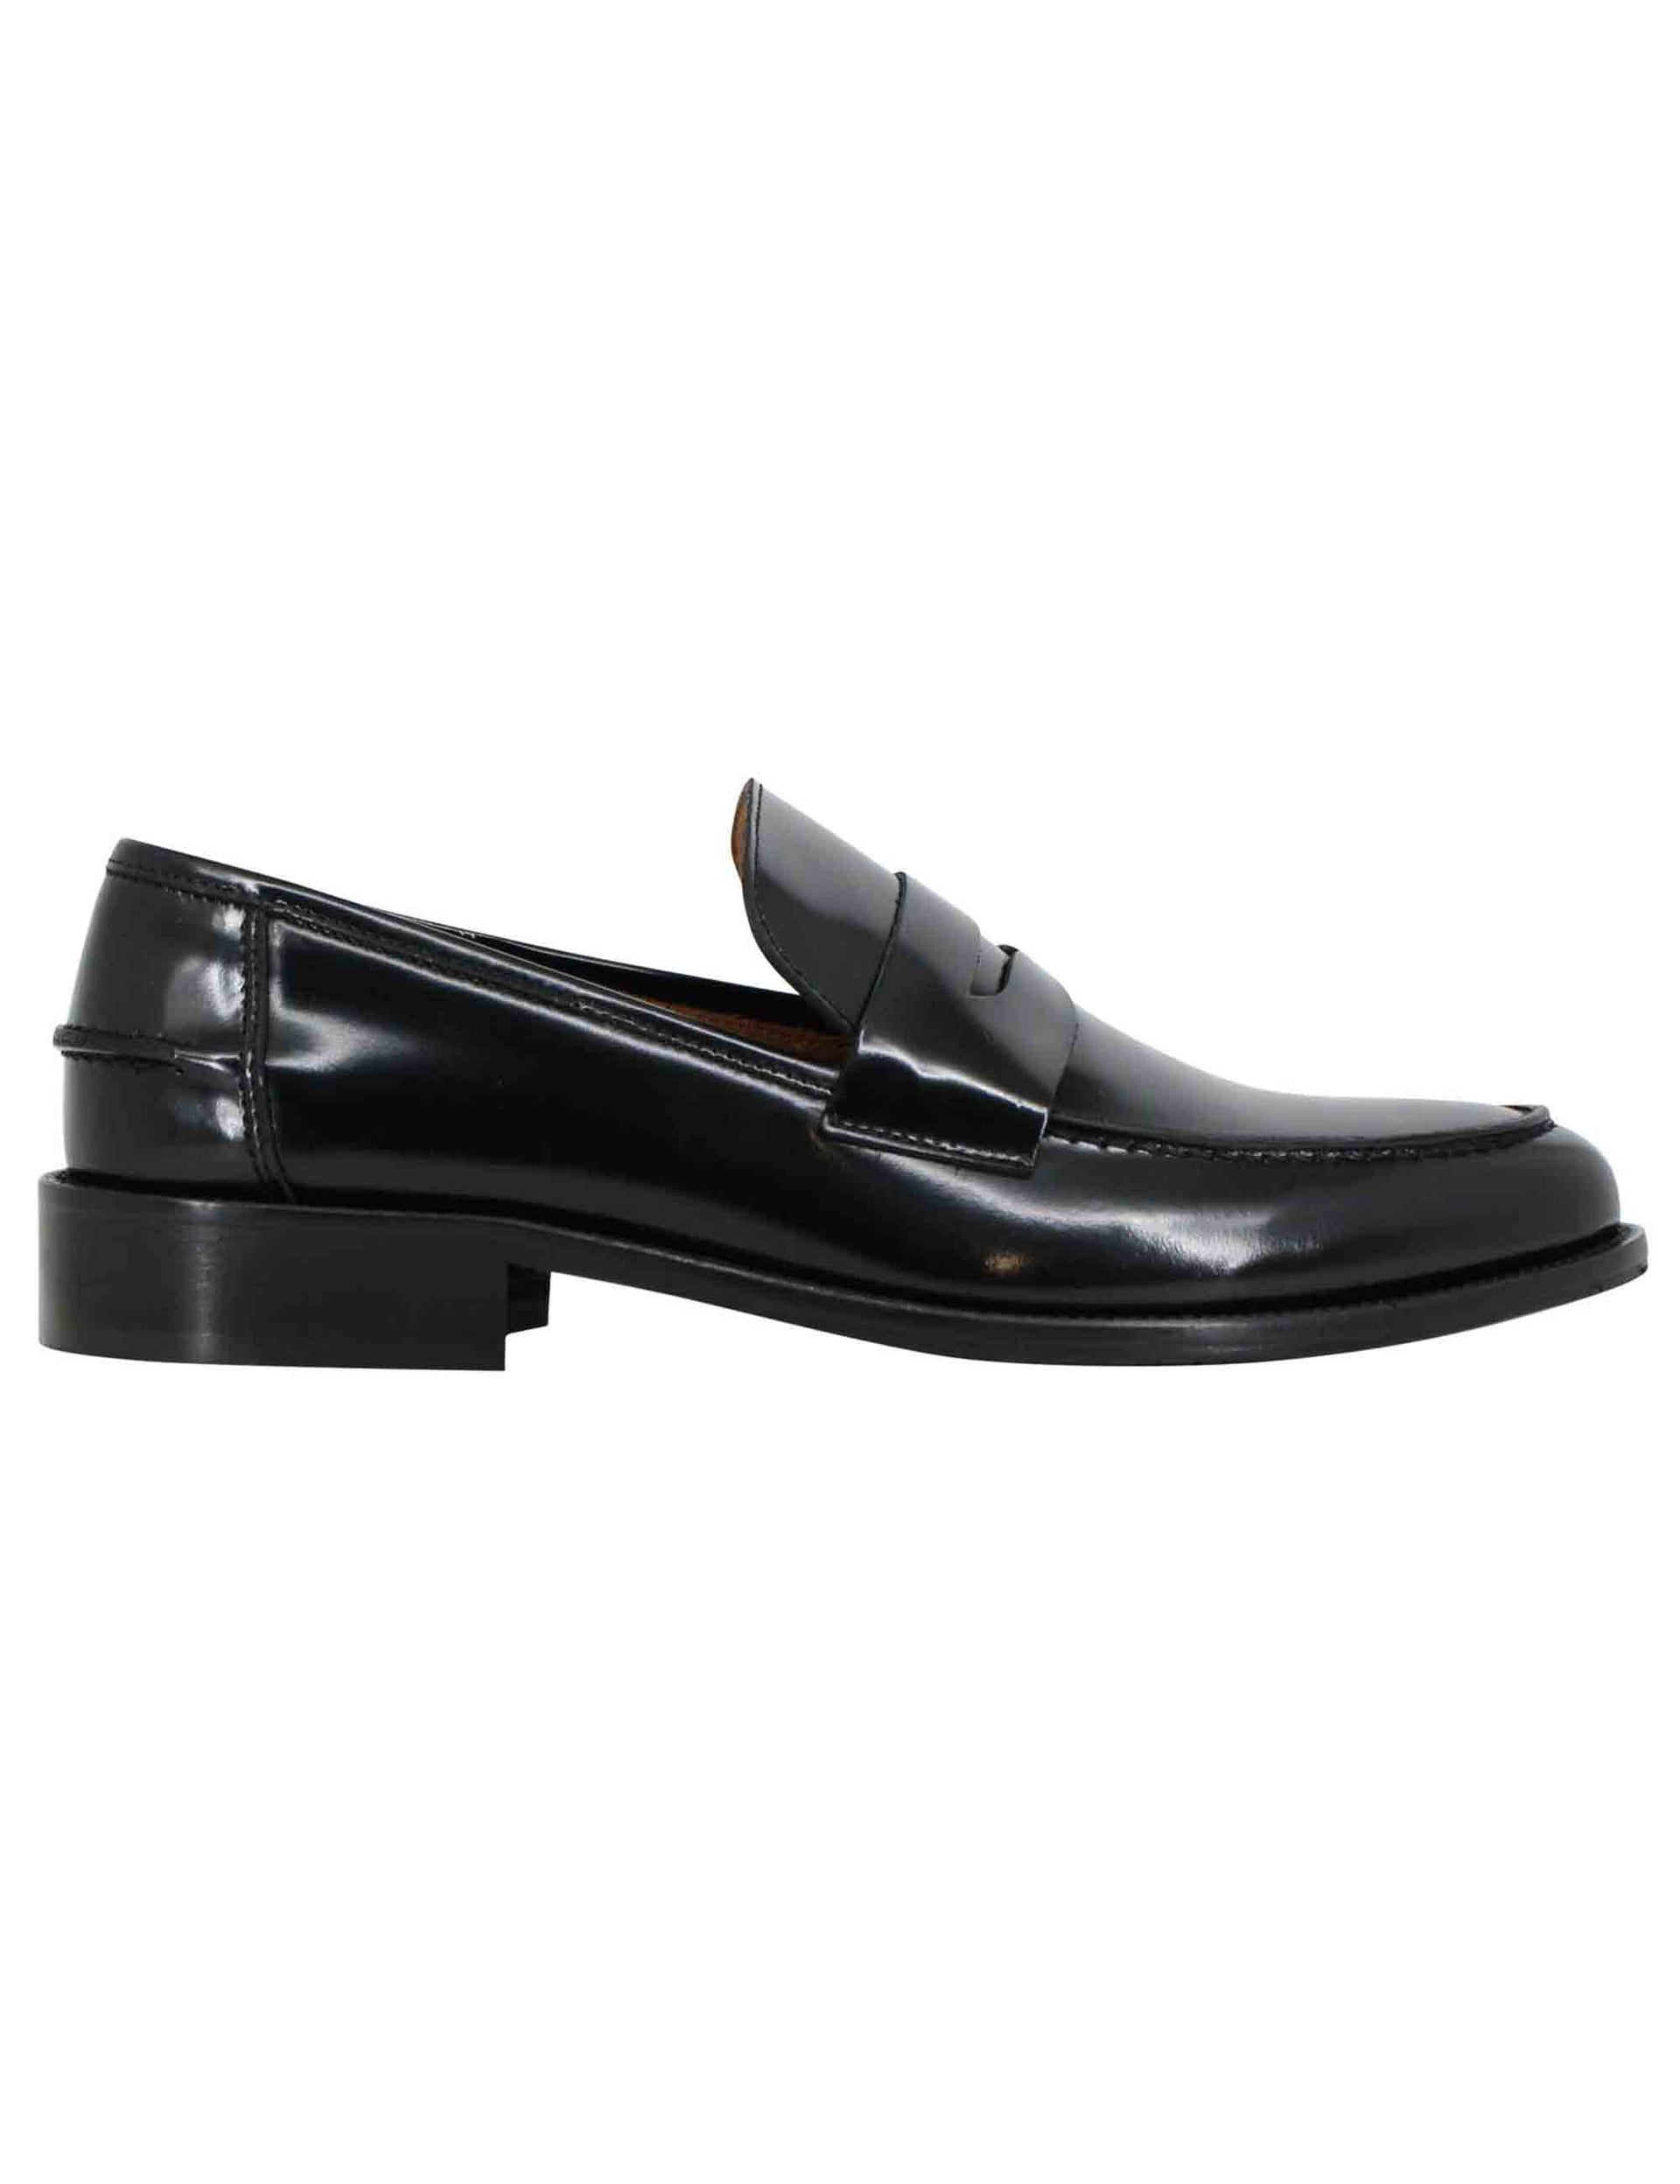 Men's moccasins in black shiny leather and stitched leather sole